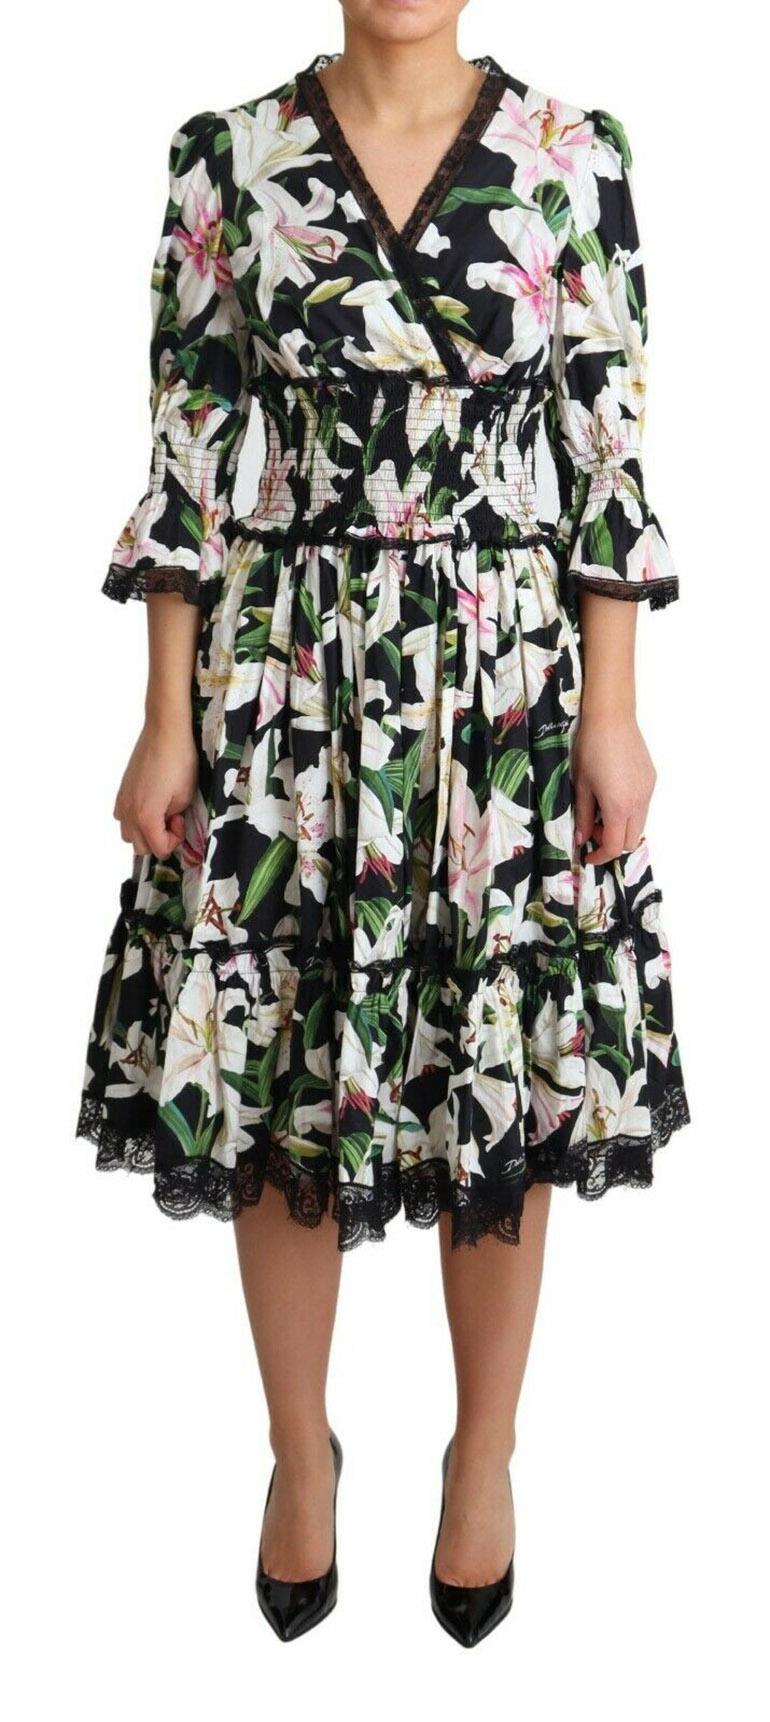 Gorgeous brand new with tags, 100% Authentic Dolce & Gabbana floral cotton midi dress.

Model: Midi dress

Color: Black floral print

Zipper closure on the back

Logo details

Made in Italy

Material: 89% Cotton 9% NYlon 2% Rayon

Lining: 100%